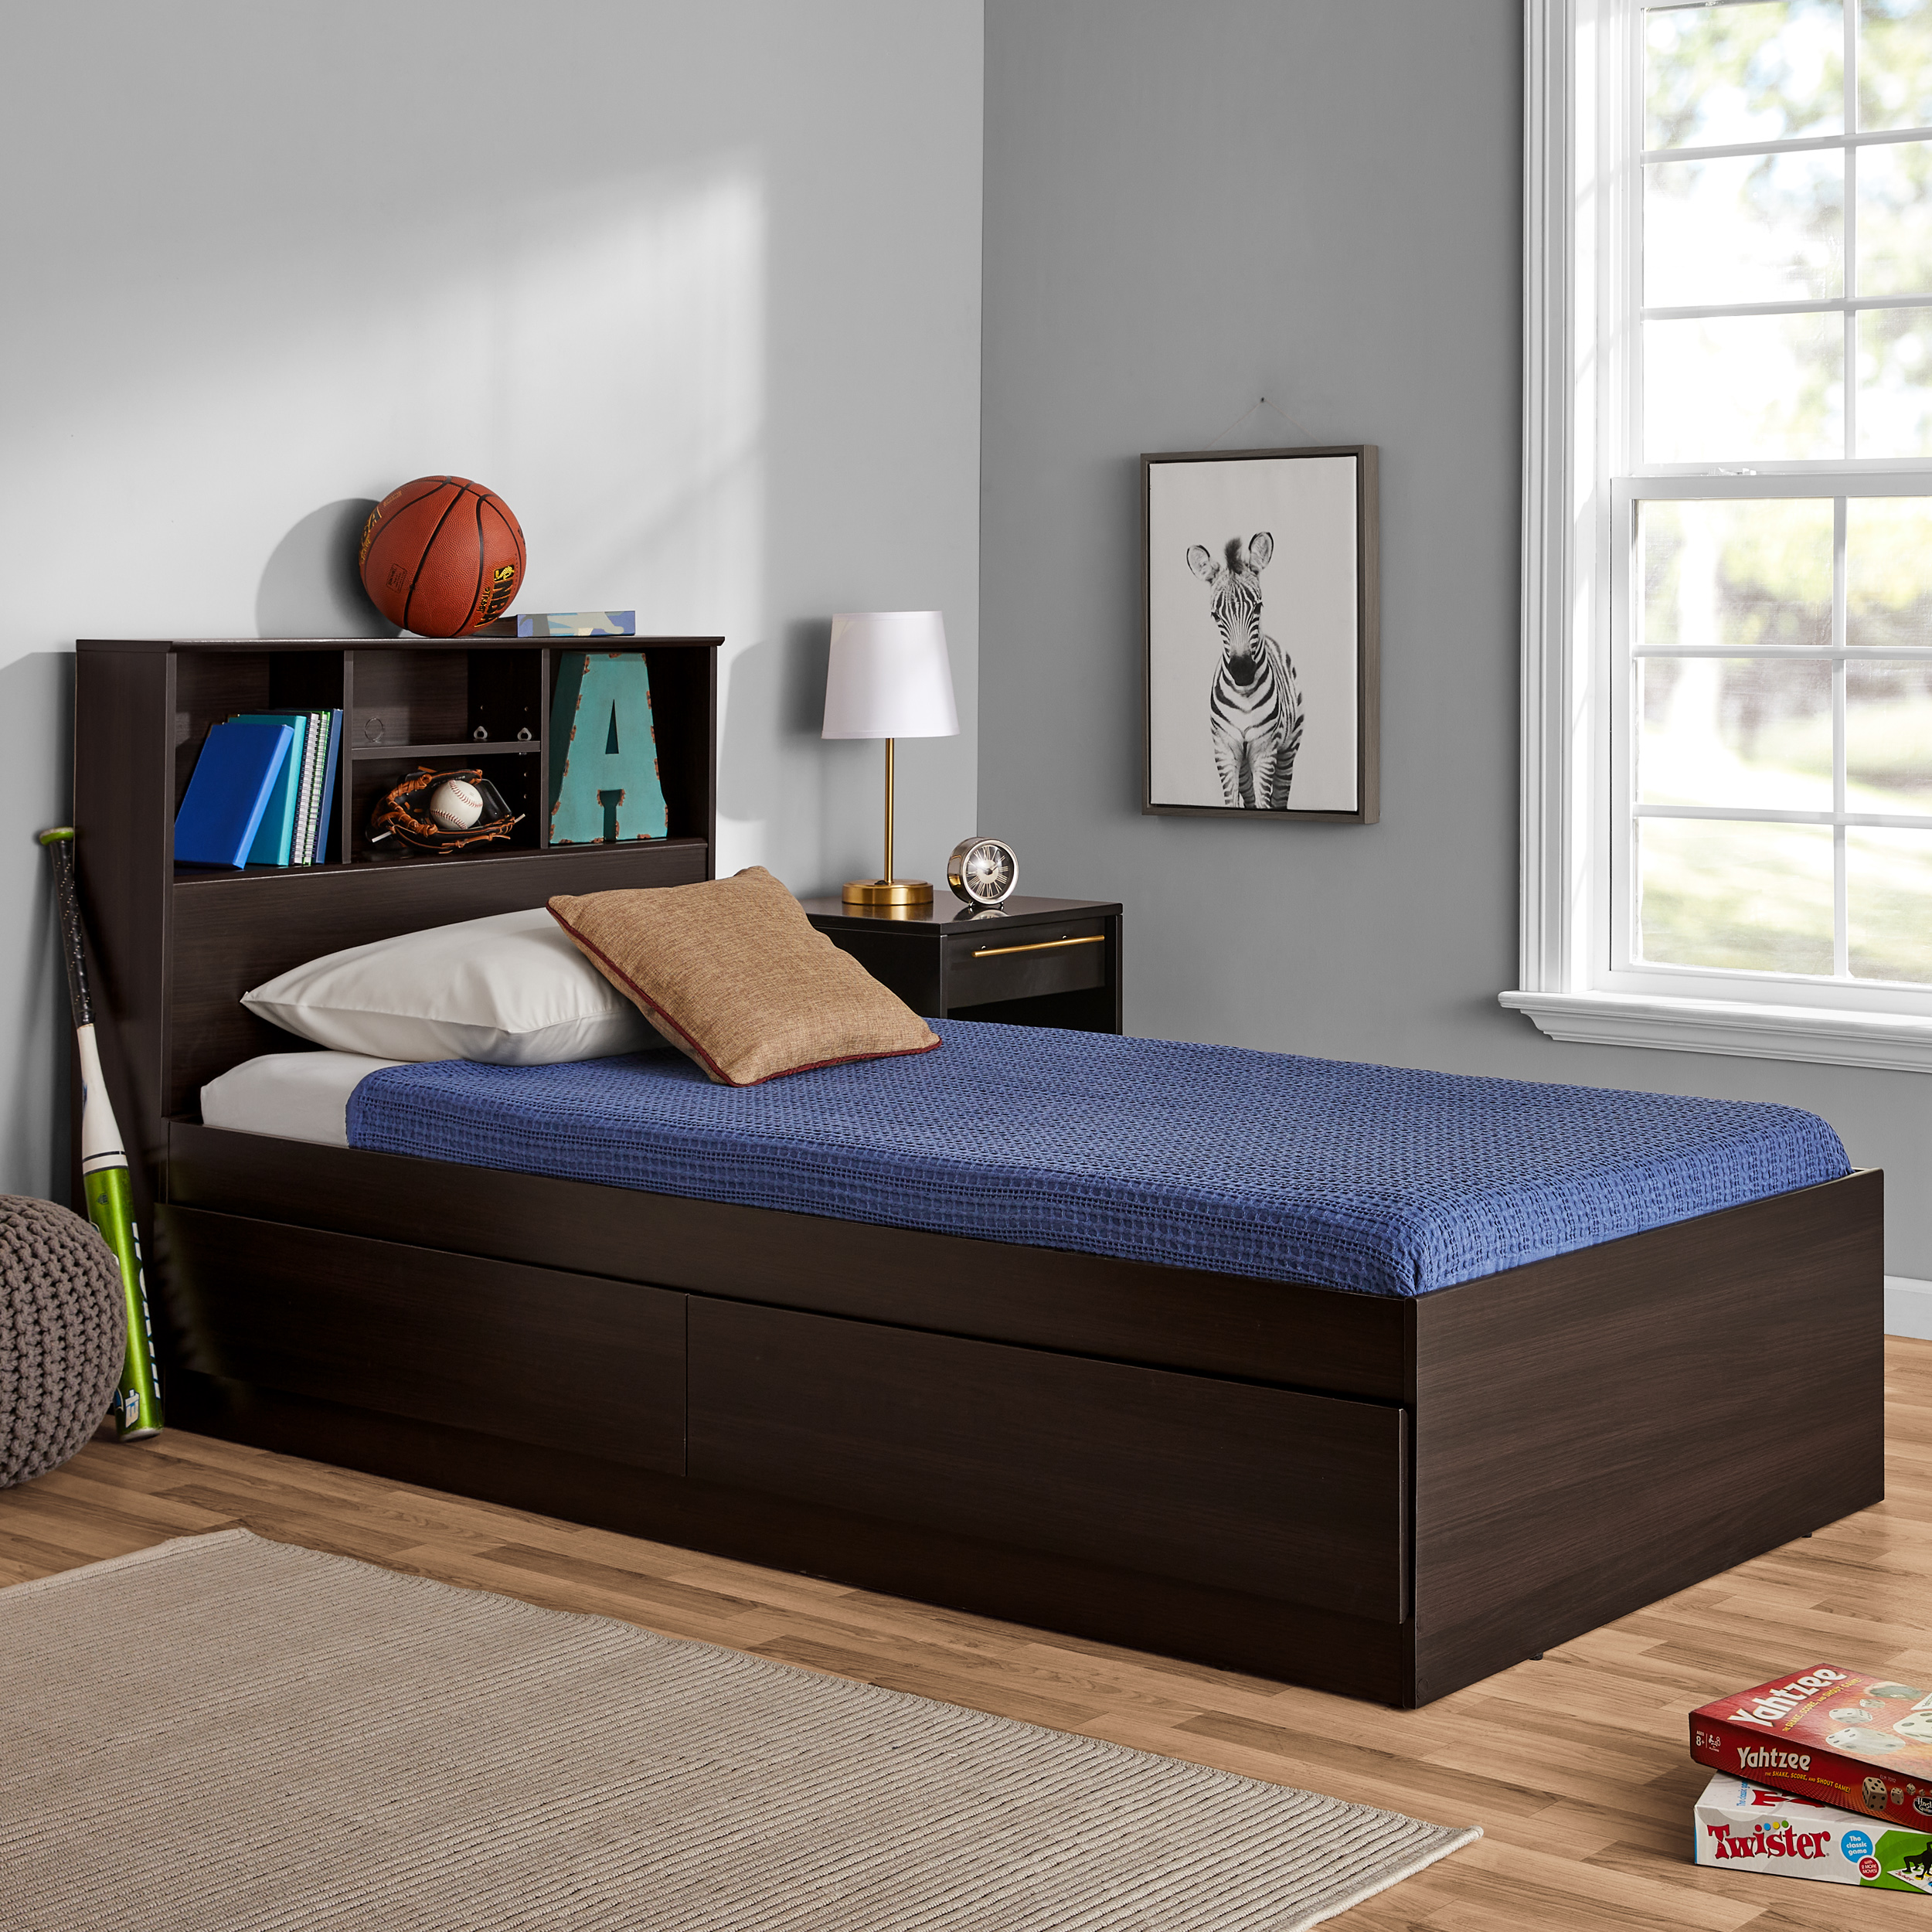 Your Zone Storage Bed with Bookcase Headboard, Twin, Espresso Finish - image 1 of 9